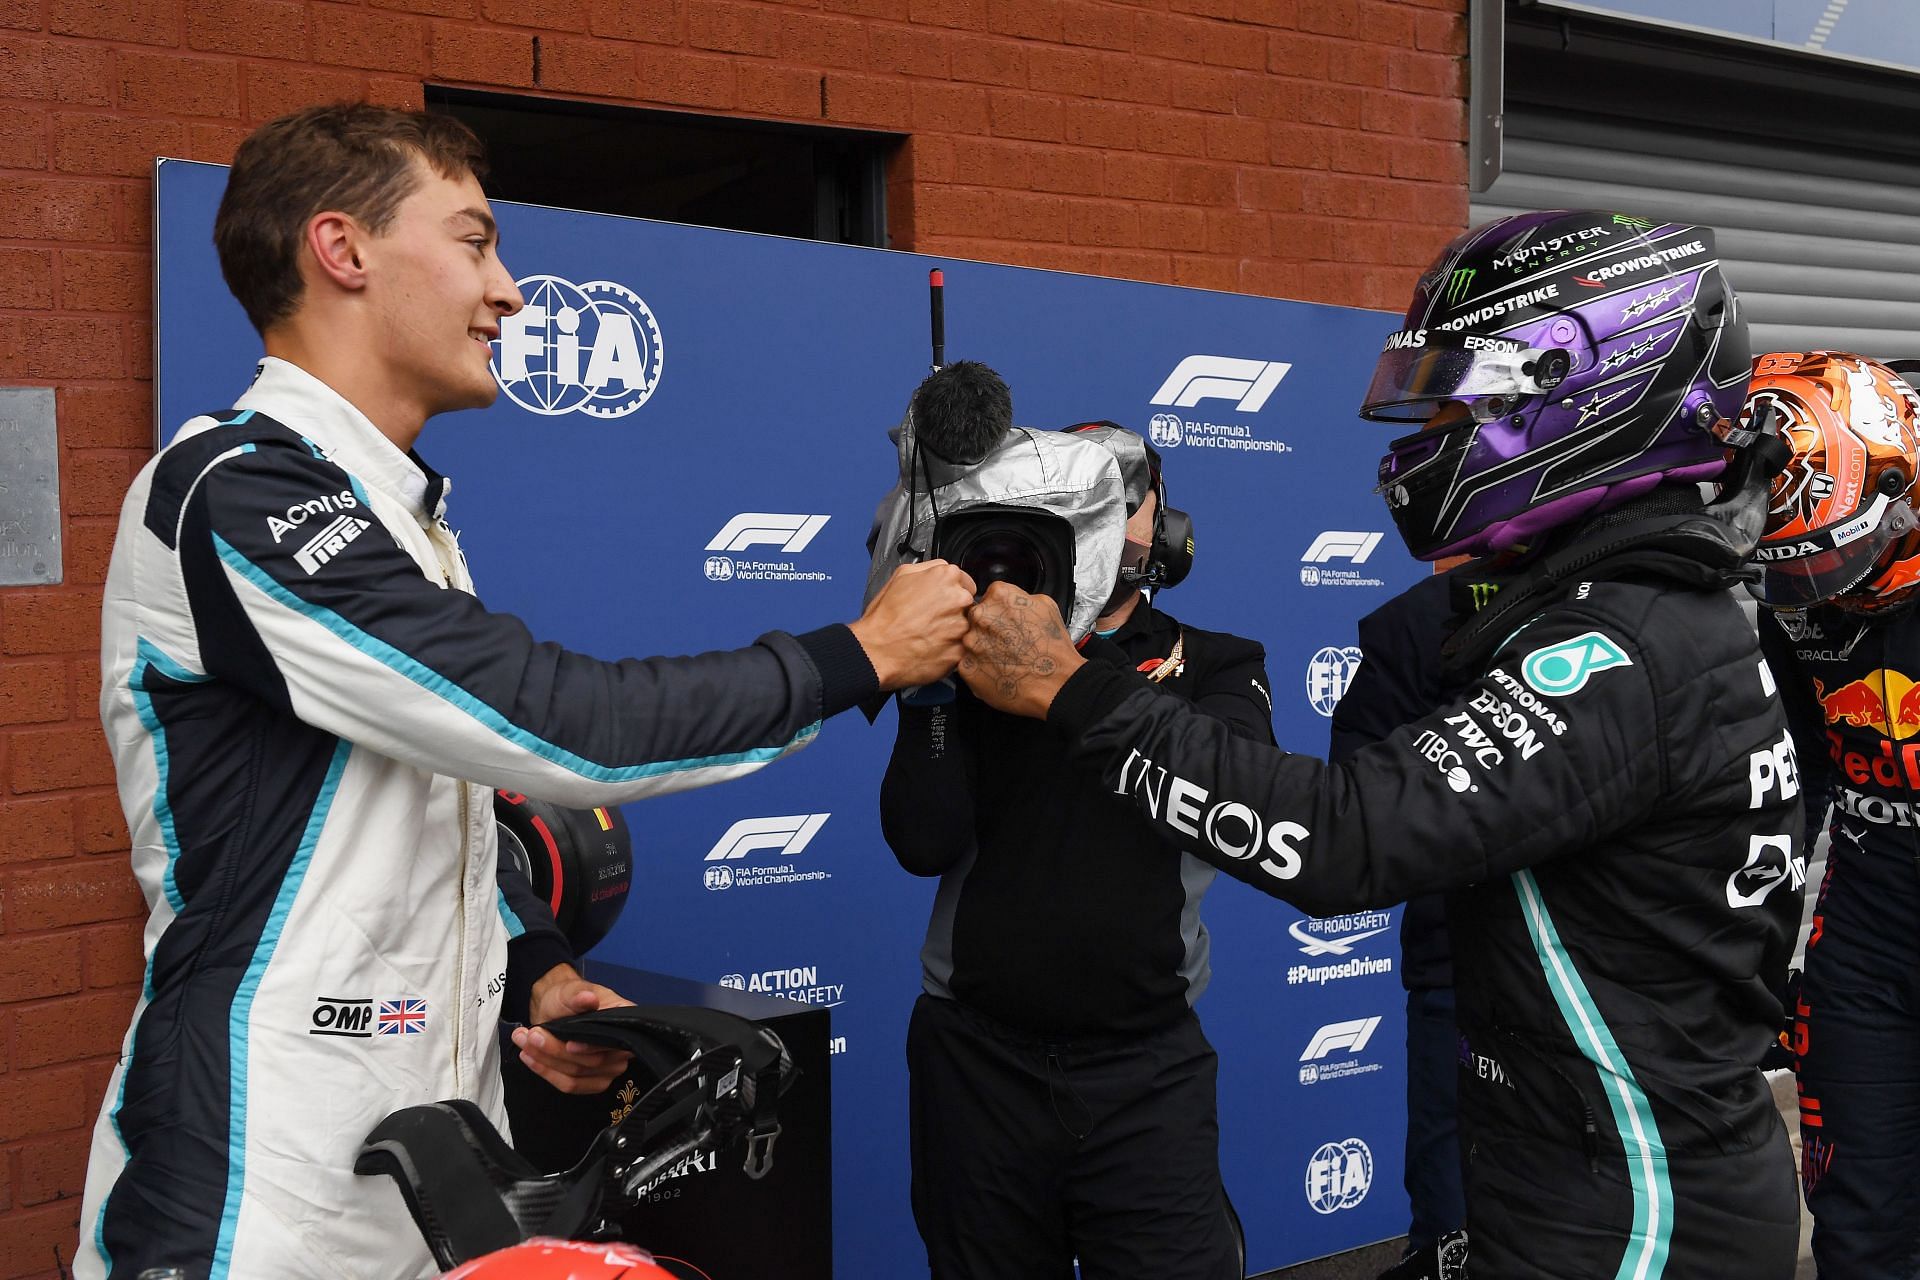 George Russell (left) out-qualifed his future Mercedes teammate Lewis Hamilton (right) for the 2021 Belgian Grand Prix